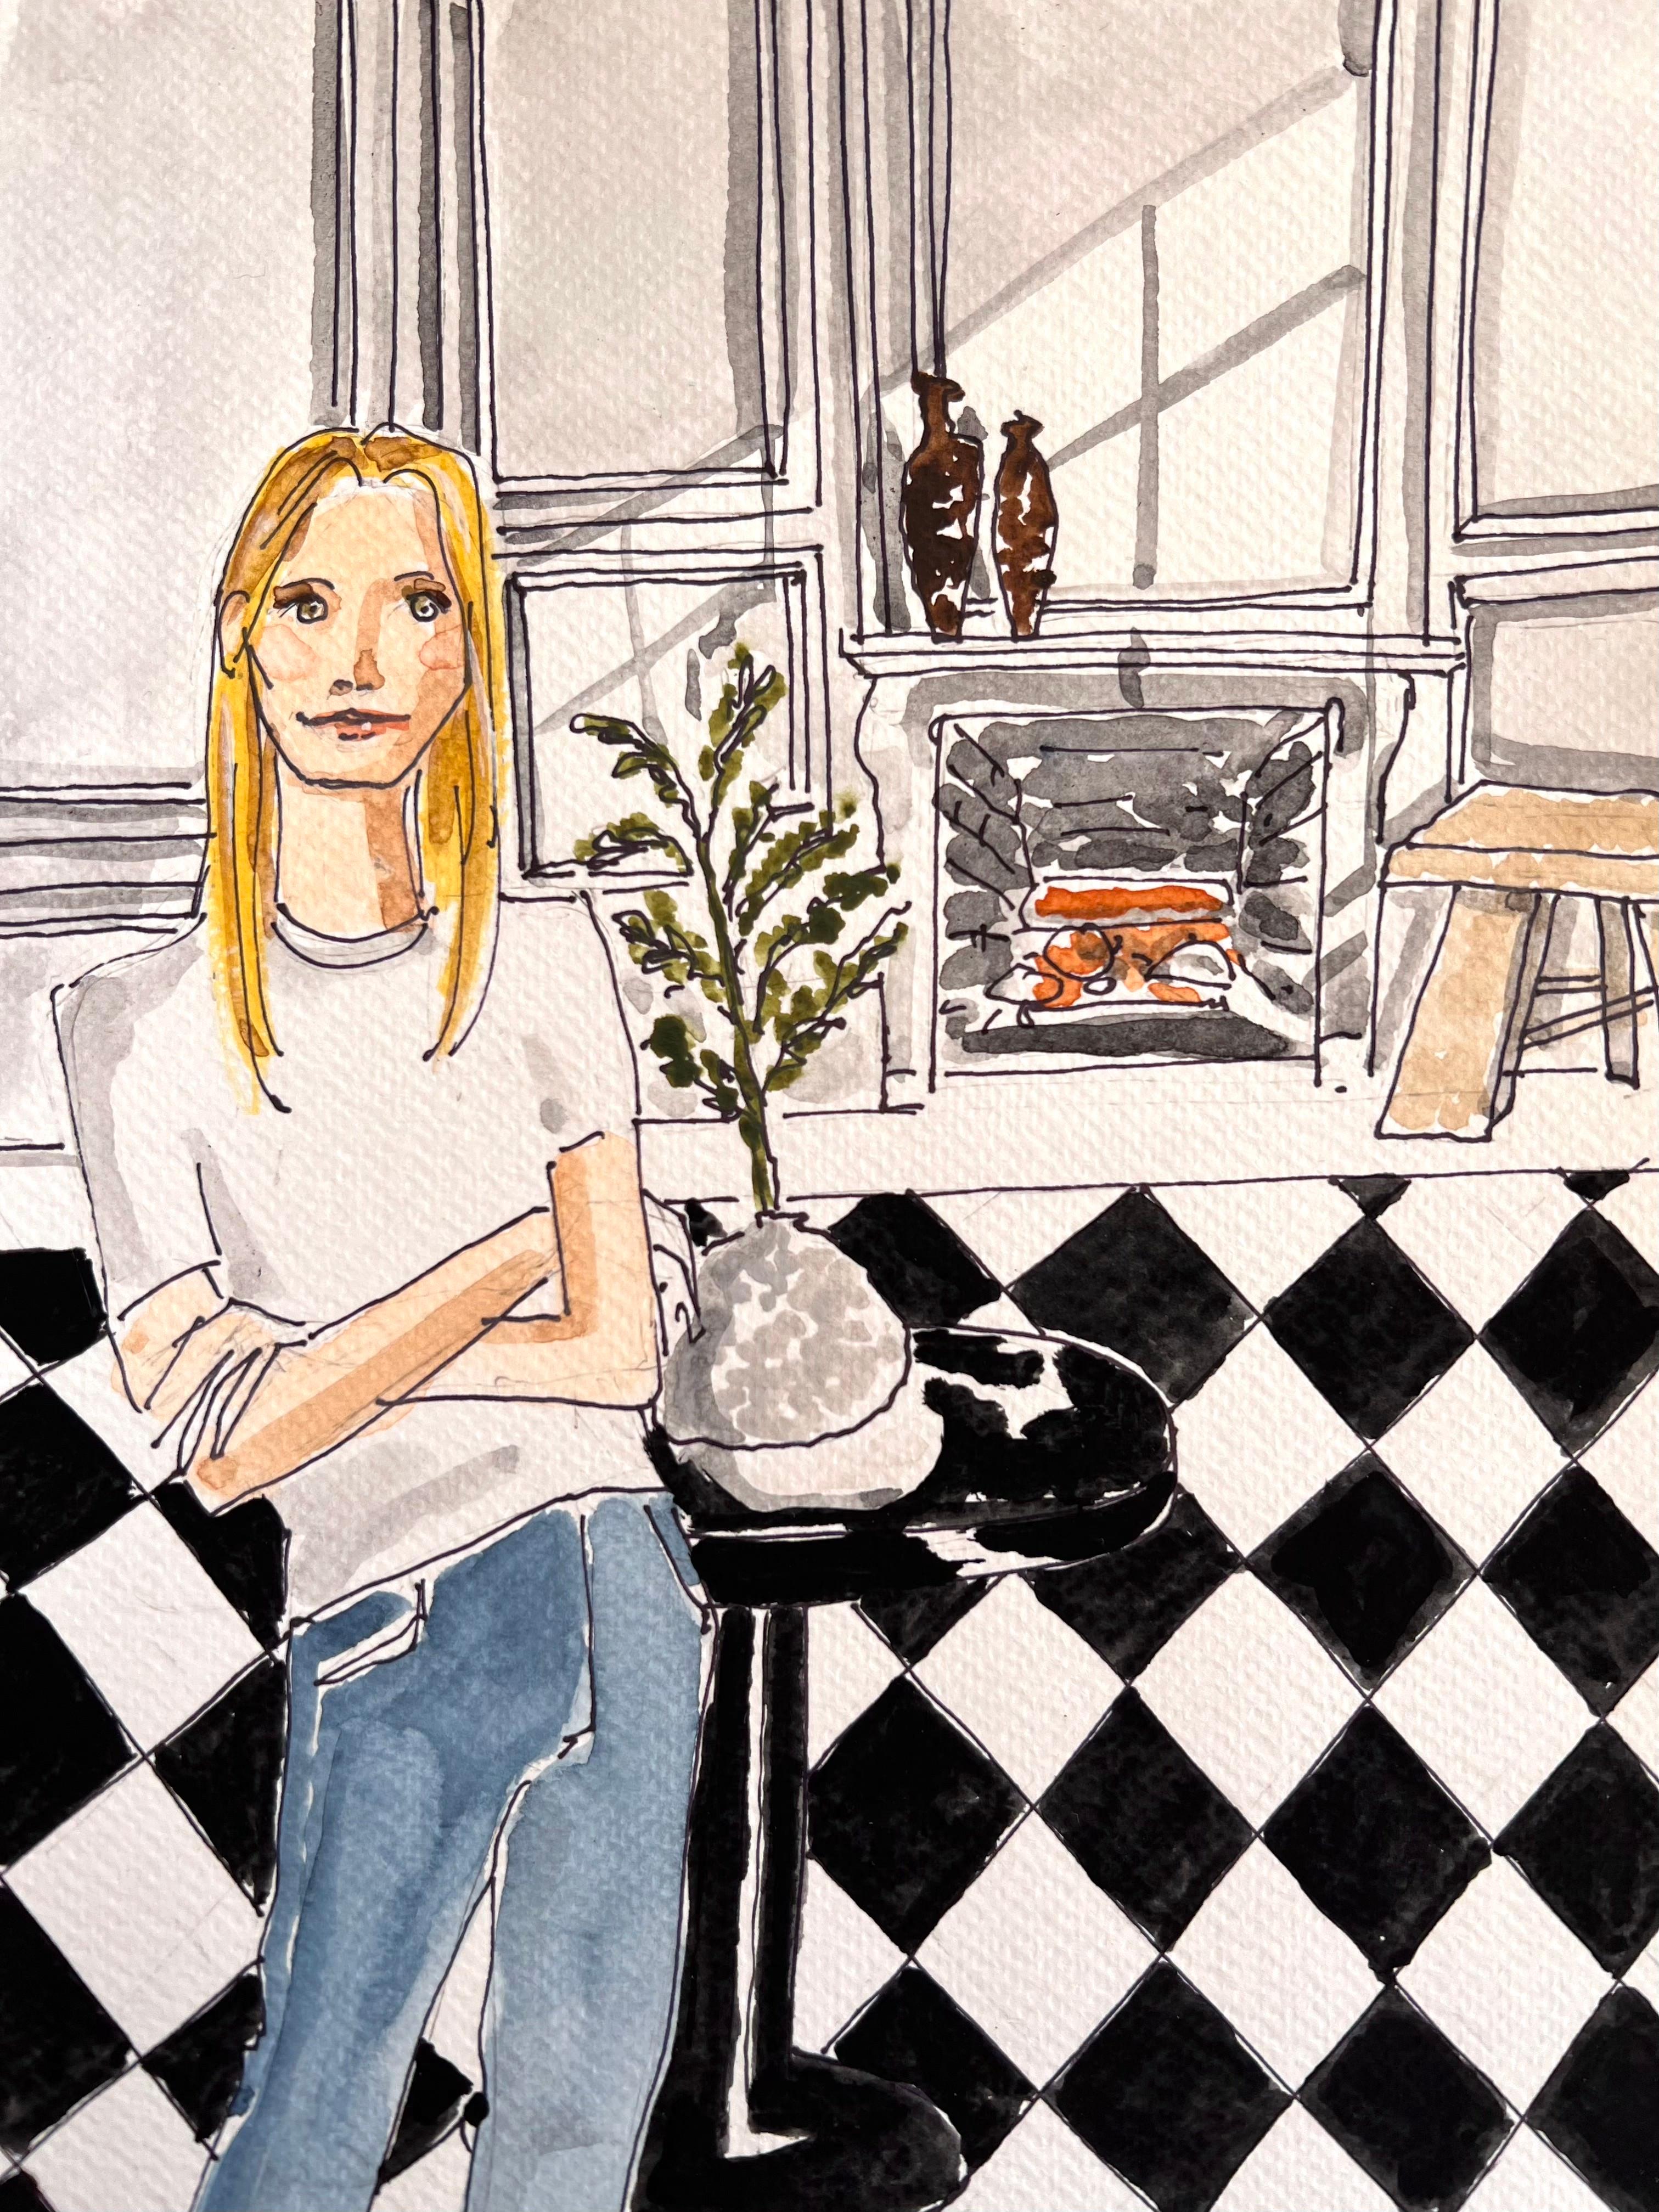 Manuel Santelices Figurative Art - Actress Gwyneth Paltrow at home in Montecito, CA Ink and watercolor on paper